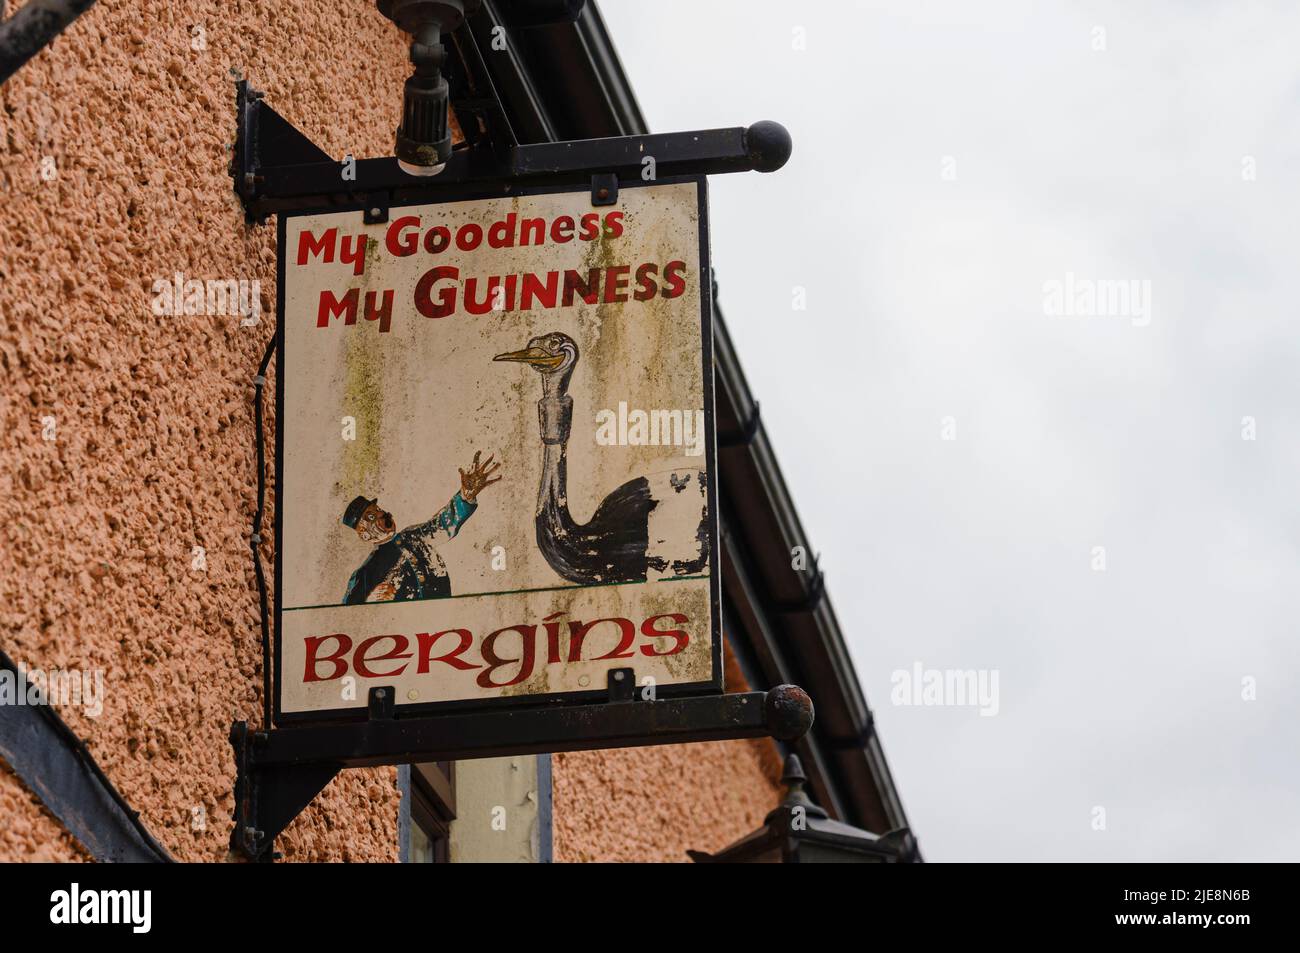 Very old Guinness sign outside an Irish pub with the slogan 'My goodness, My Guinness' Stock Photo